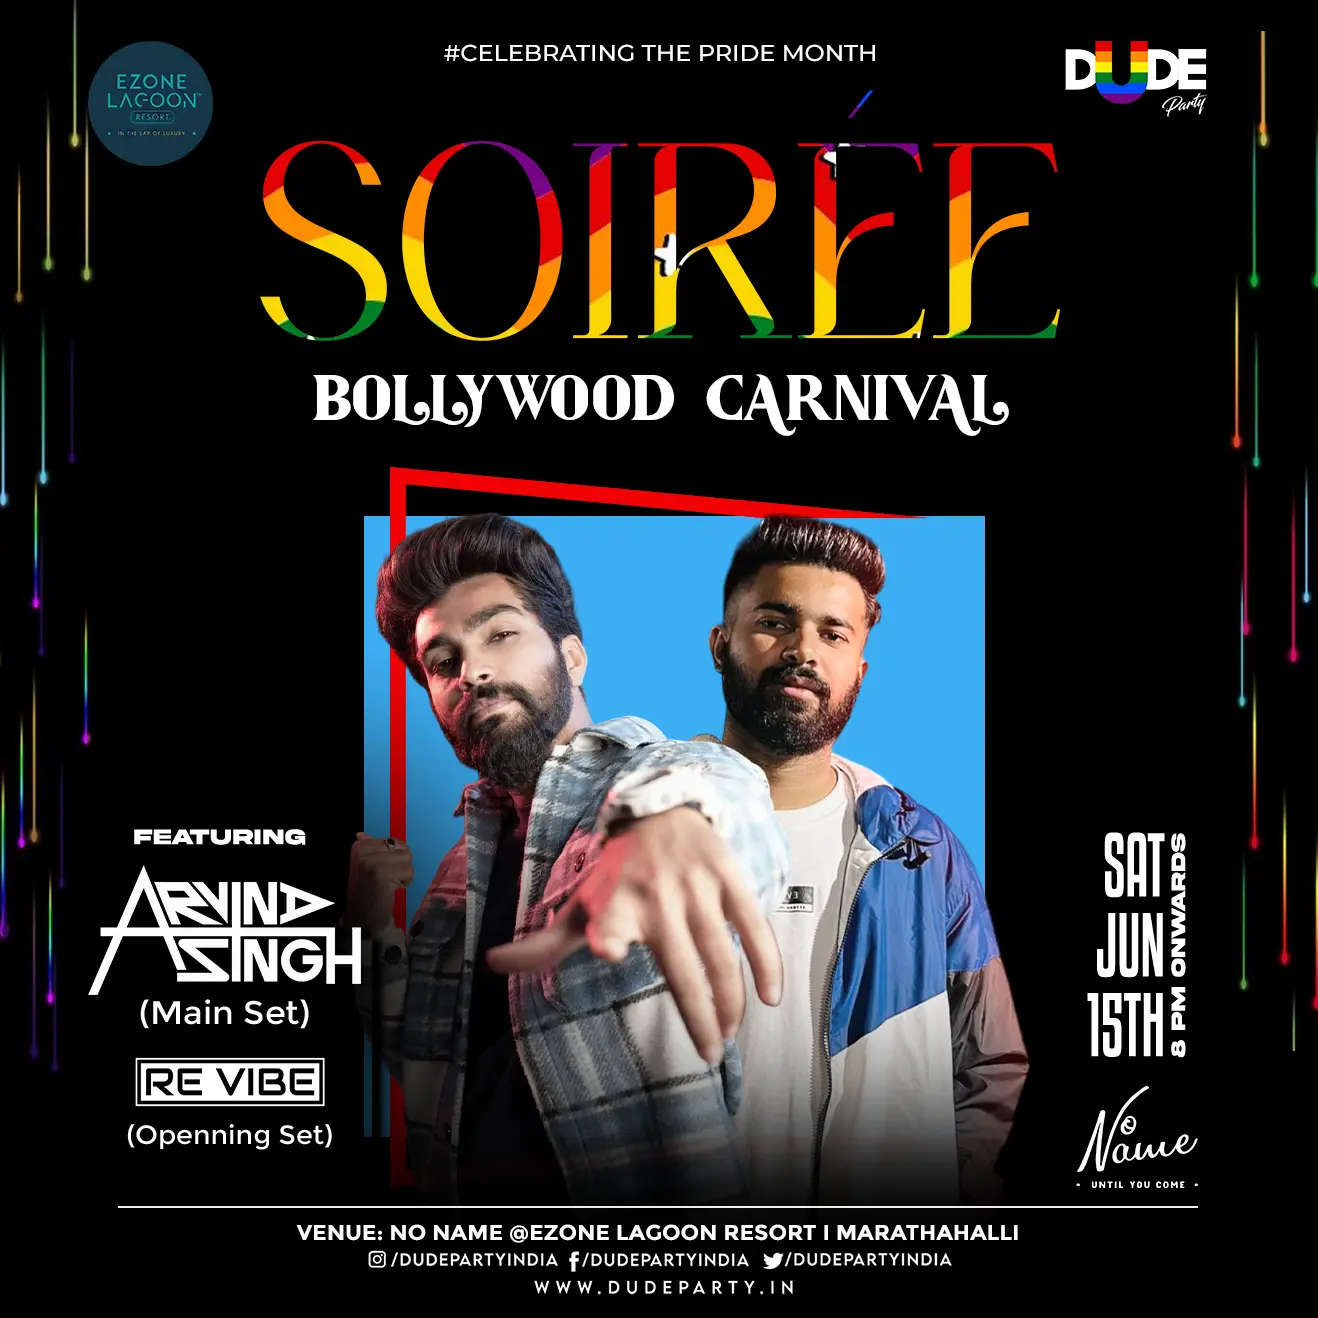 SOIREE BOLLYWOOD CARNIVAL Dude Party India